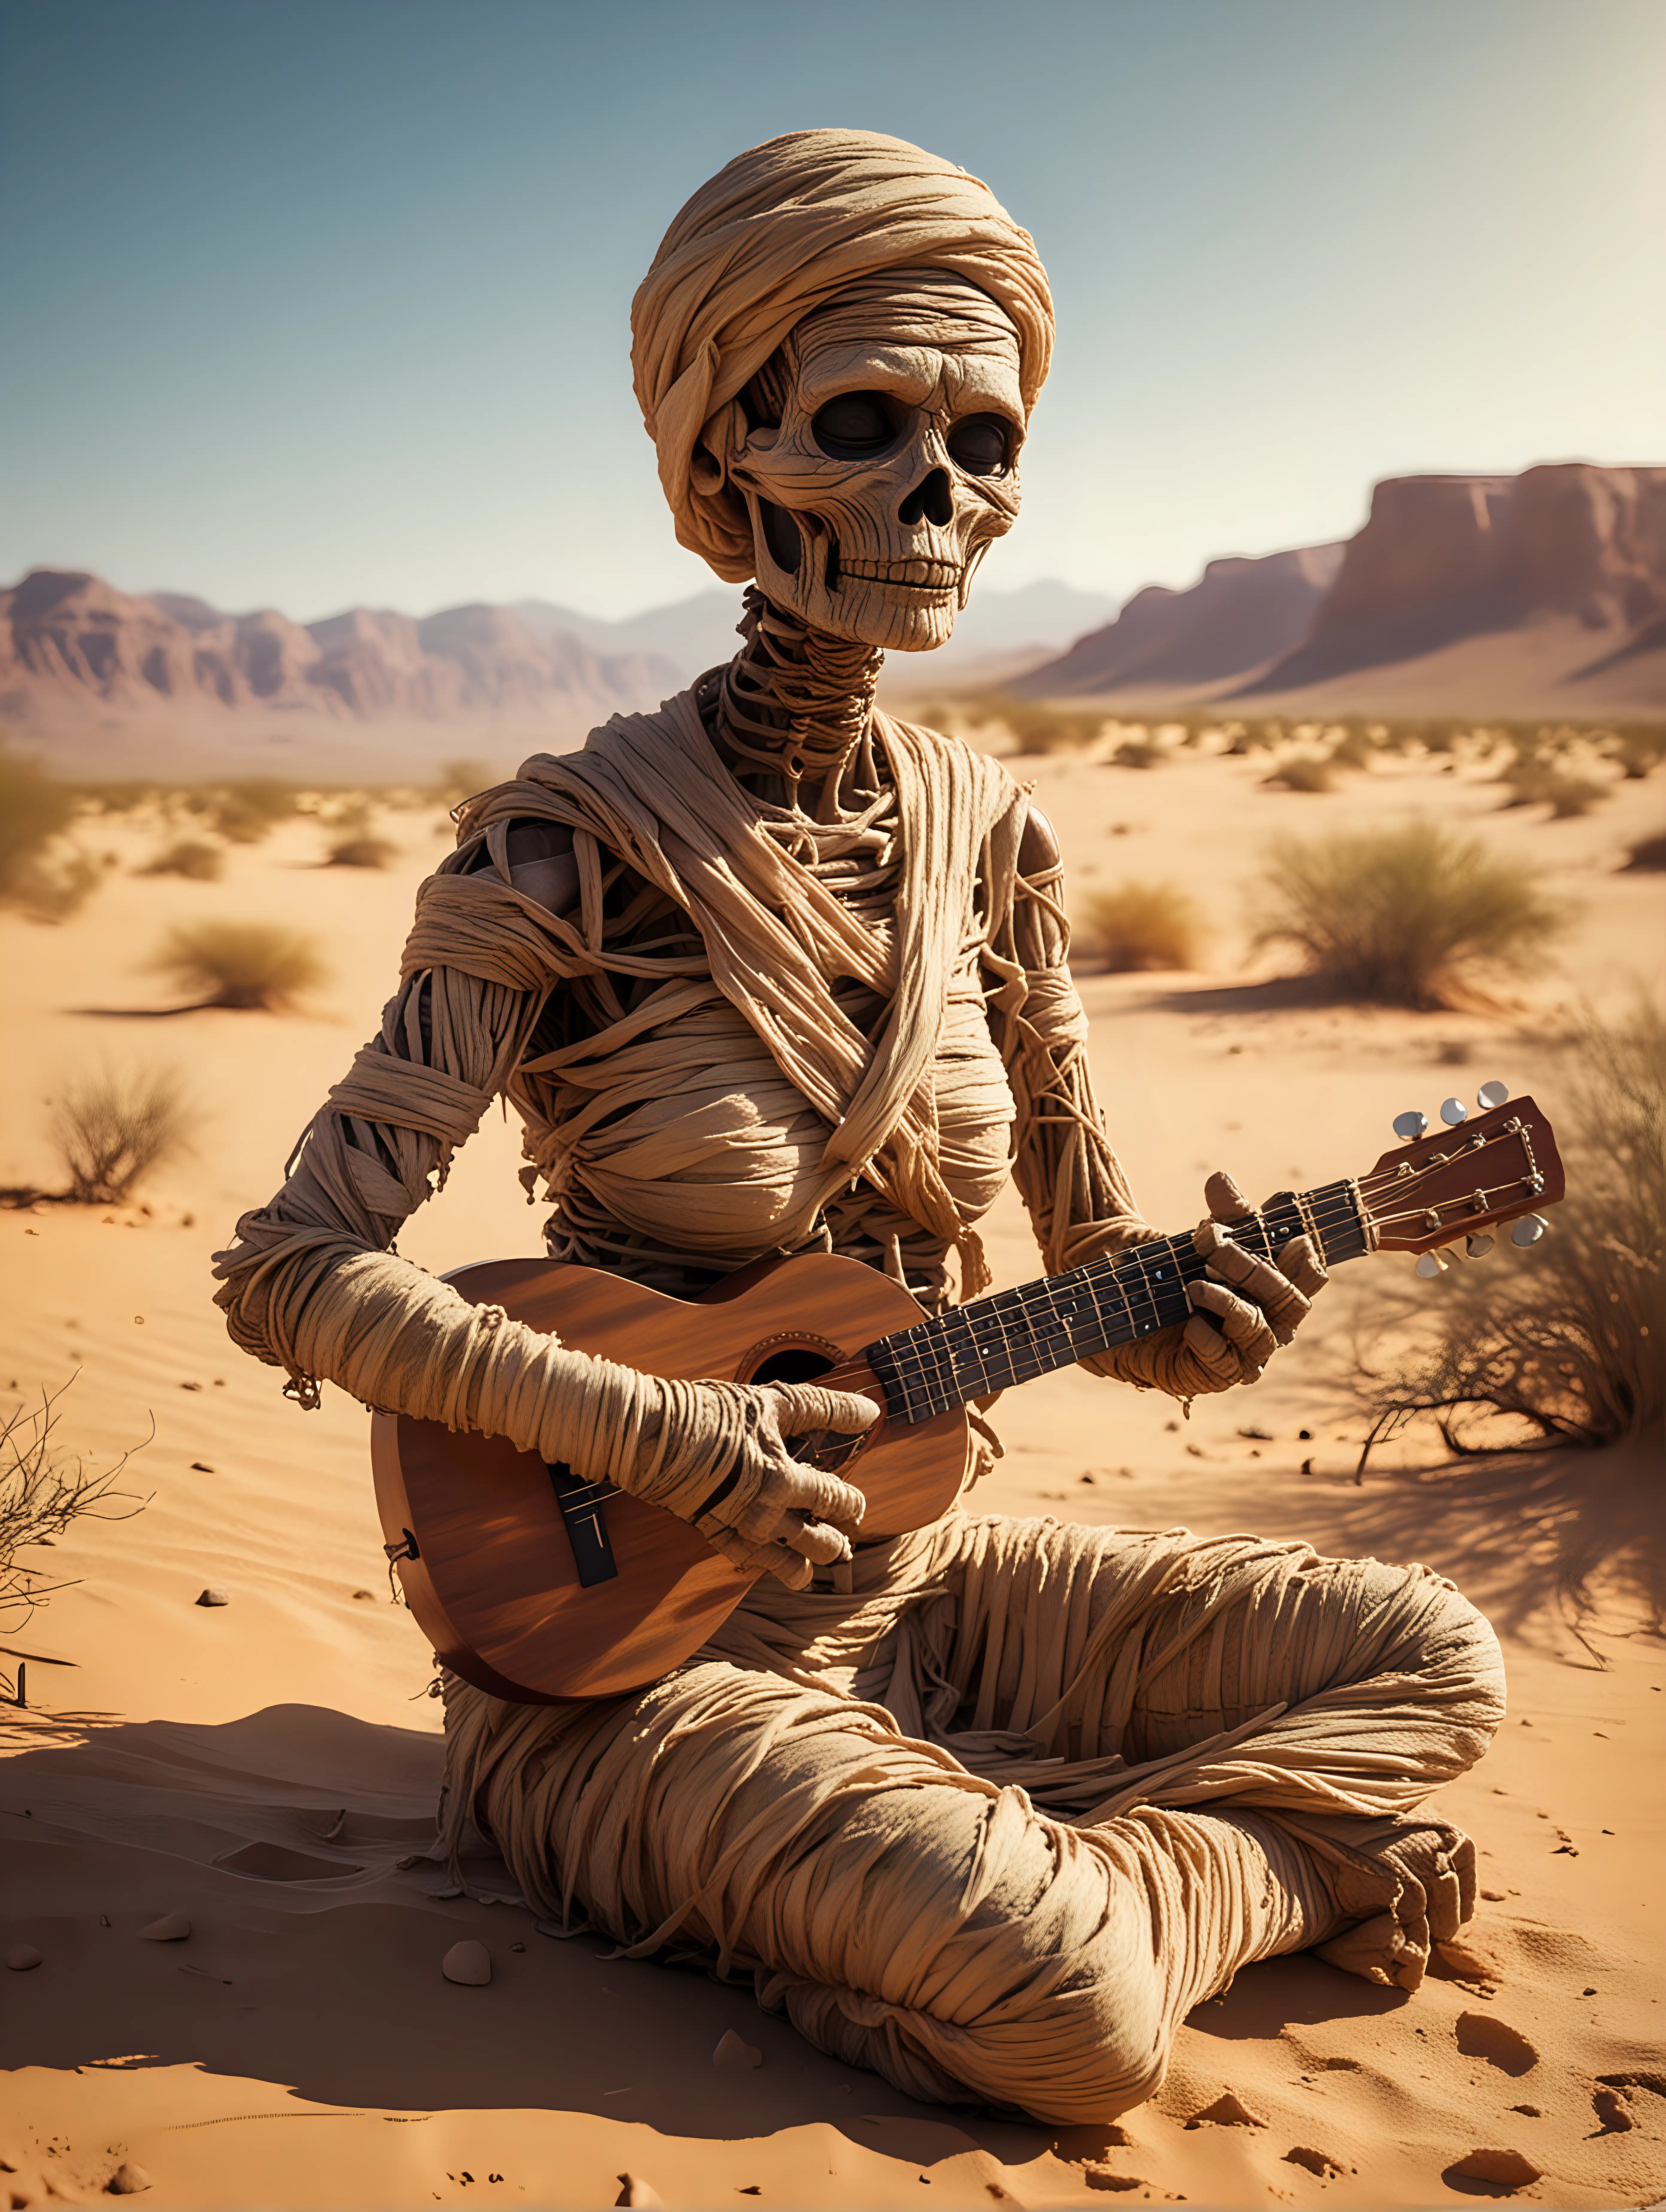 "Close-up view of a mummy in the midst of a desert, strumming delicately on a ukulele. The gentle strings echoing through the barren landscape under the bright day sun.